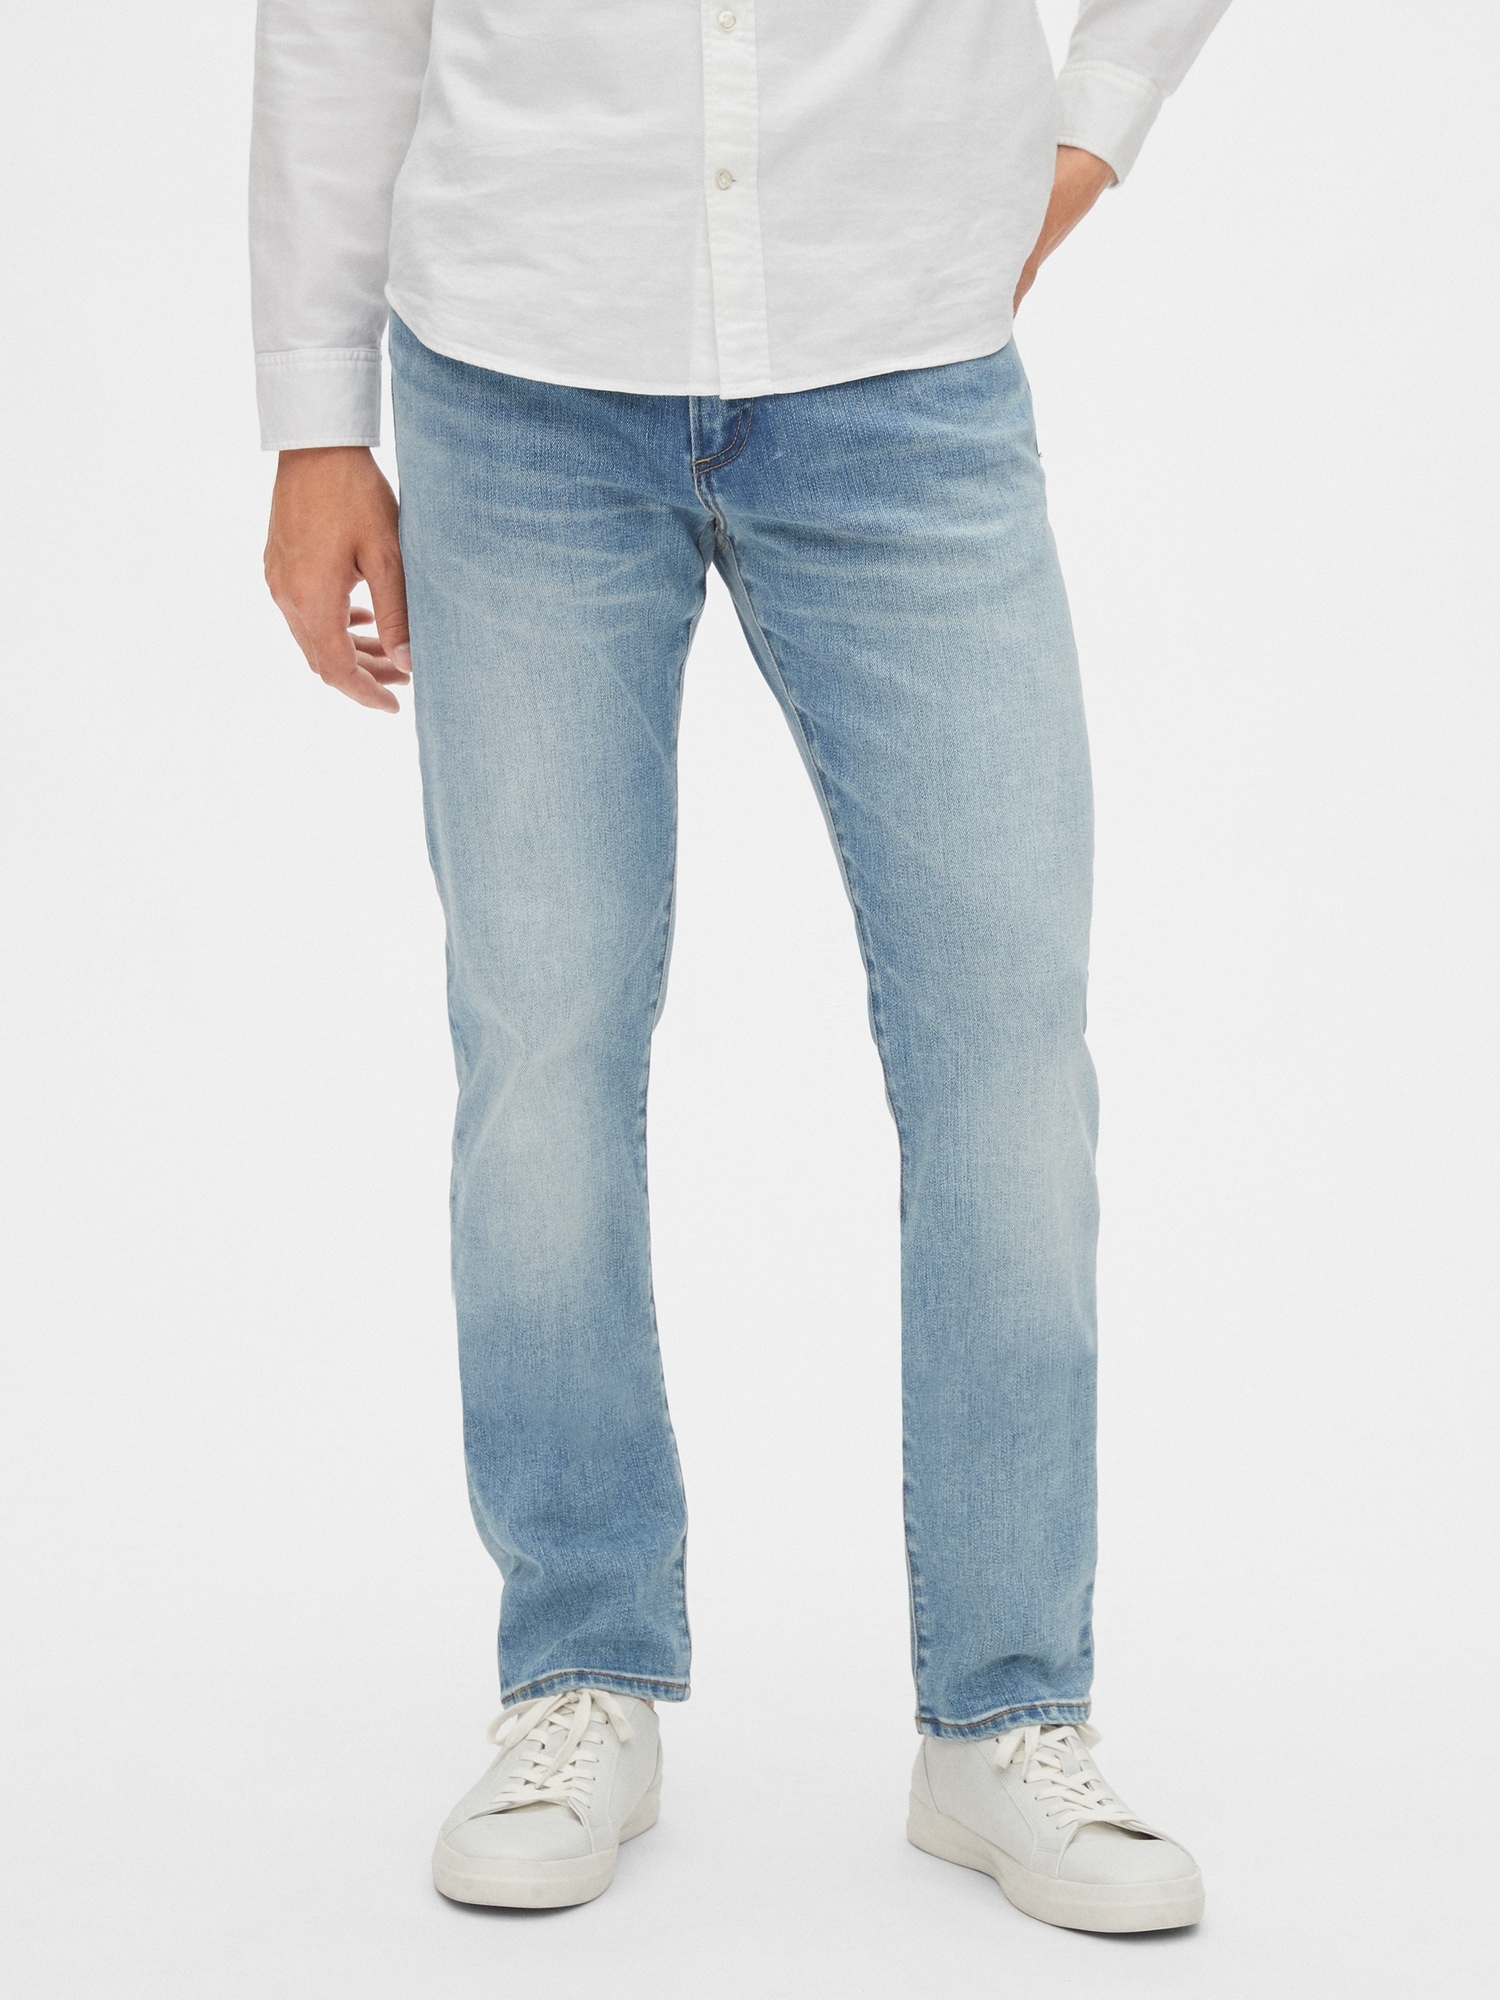 soft wear jeans in slim fit with gapflex